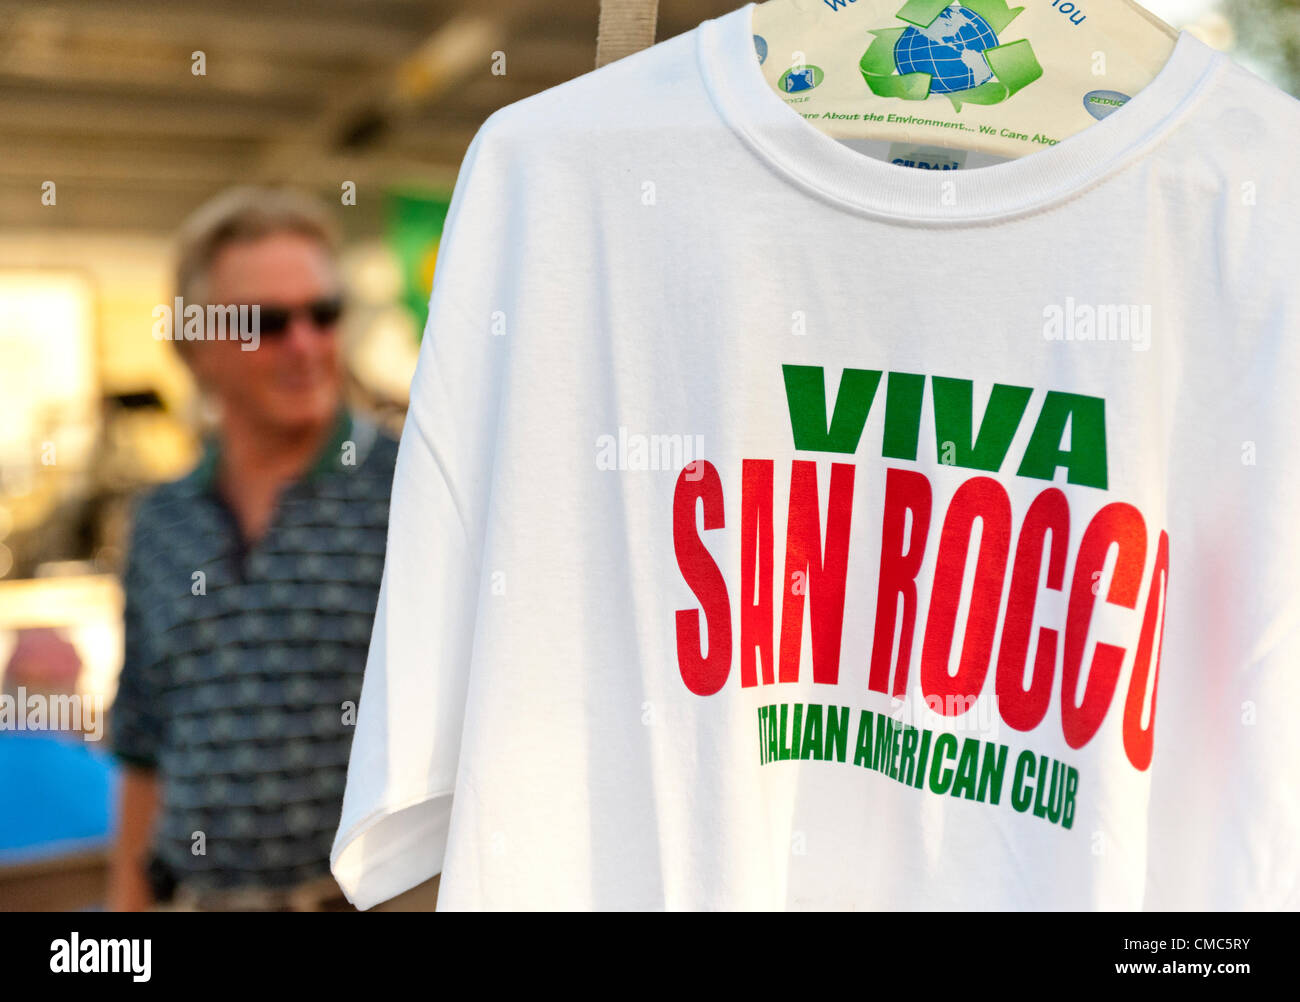 At the Feast of St. Rocco, shirts with 'Viva San Rocco Italian American Club' are for sale, on July 14, 2012, in Oyster Bay, New York, USA. The Italian American Citizens Club organized the five-day festival, which ends July 15, to promote Italian-American heritage. Stock Photo